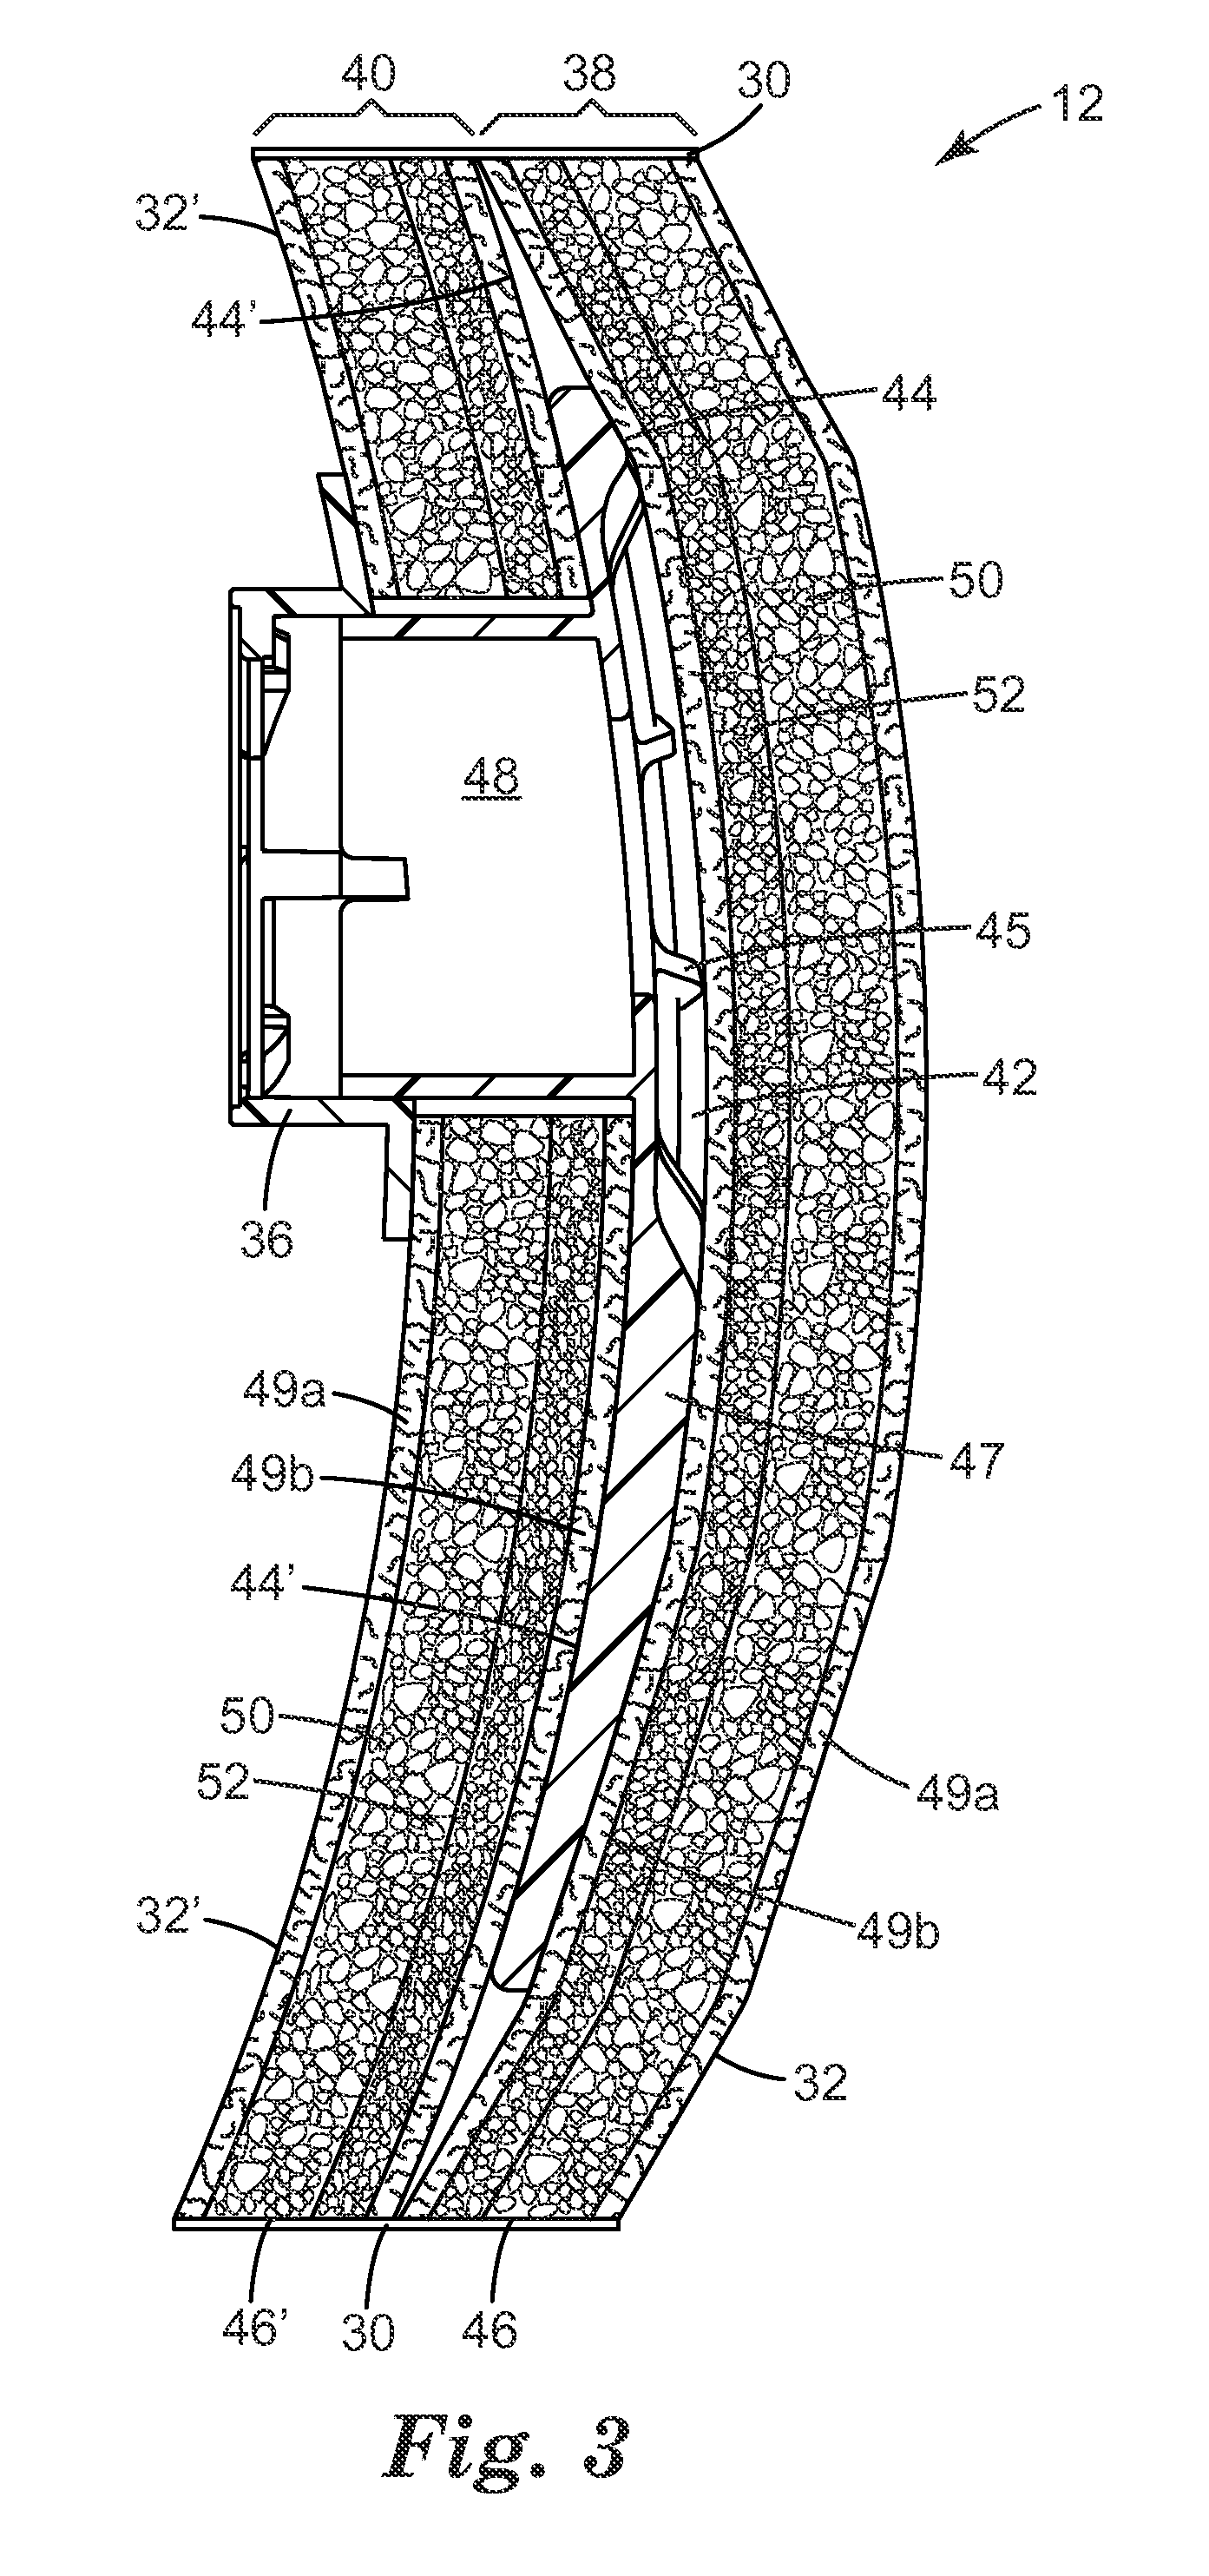 Filter cartridge having central plenum and housing sidewall